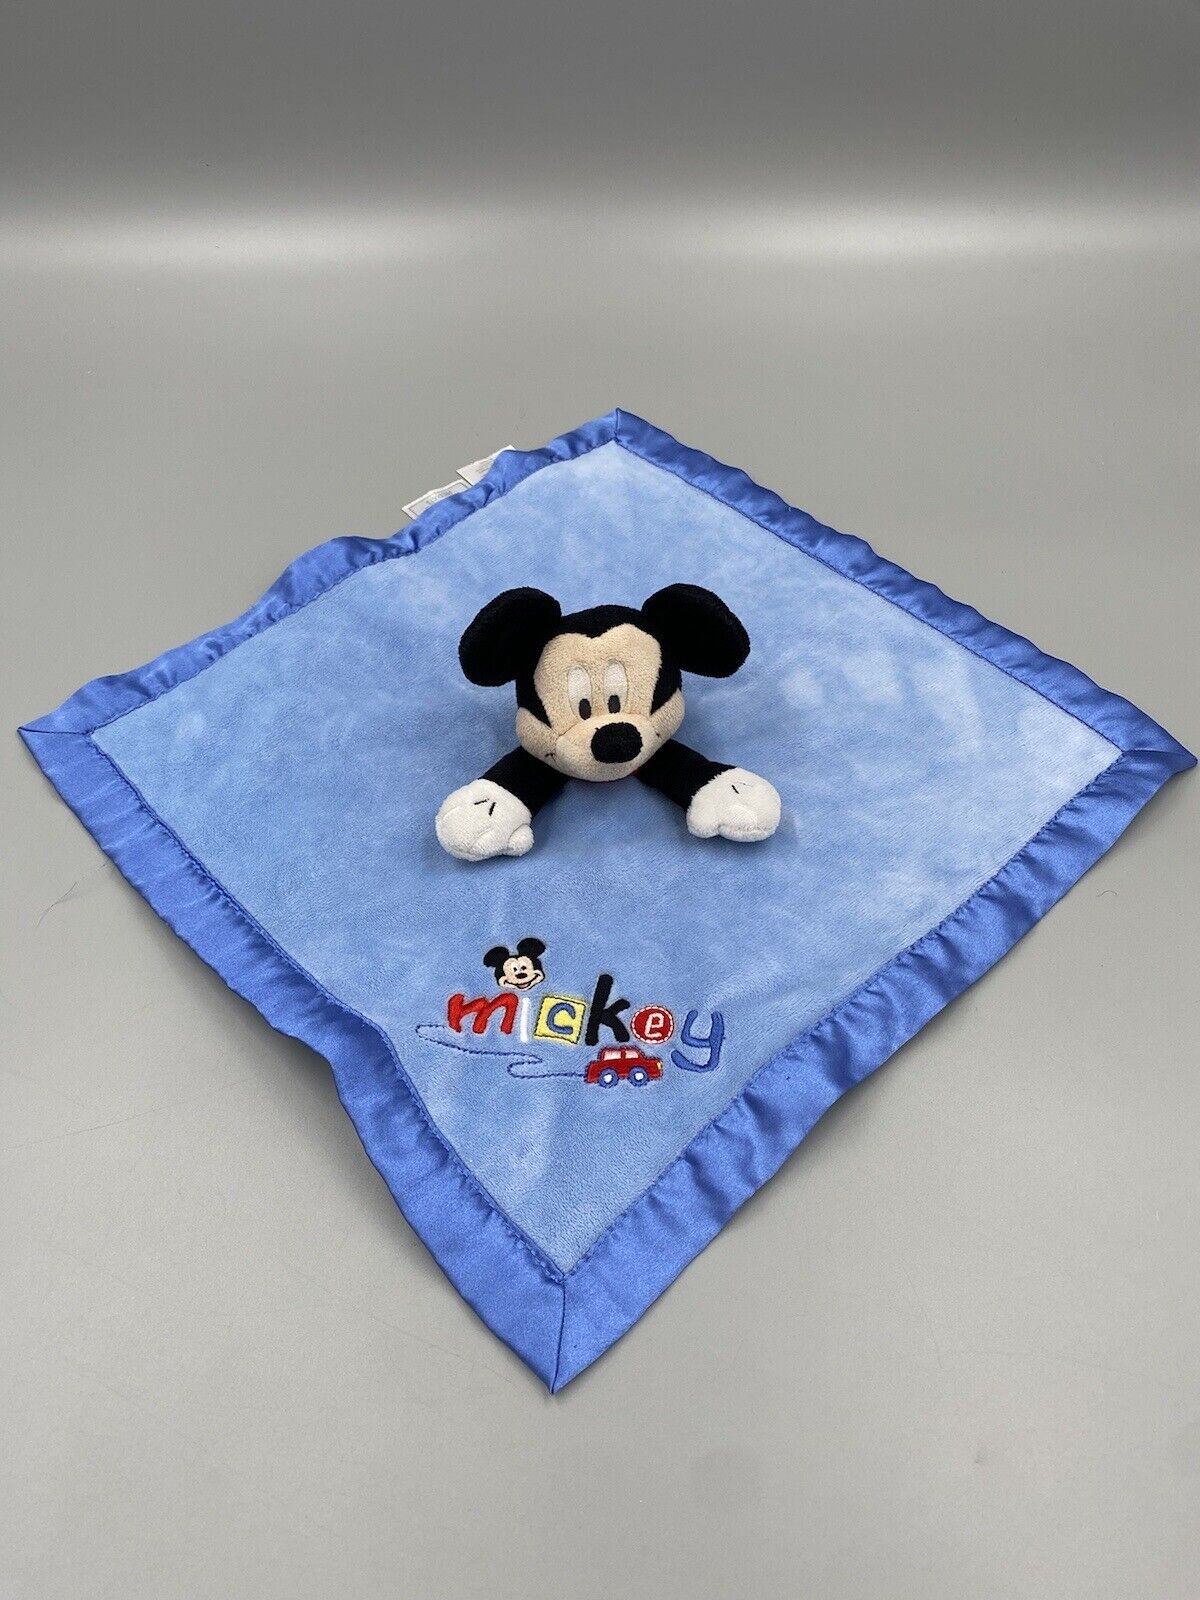 Disney Baby Mickey Mouse Rattle Lovey Plush Blue Satin Trim Security Blanket